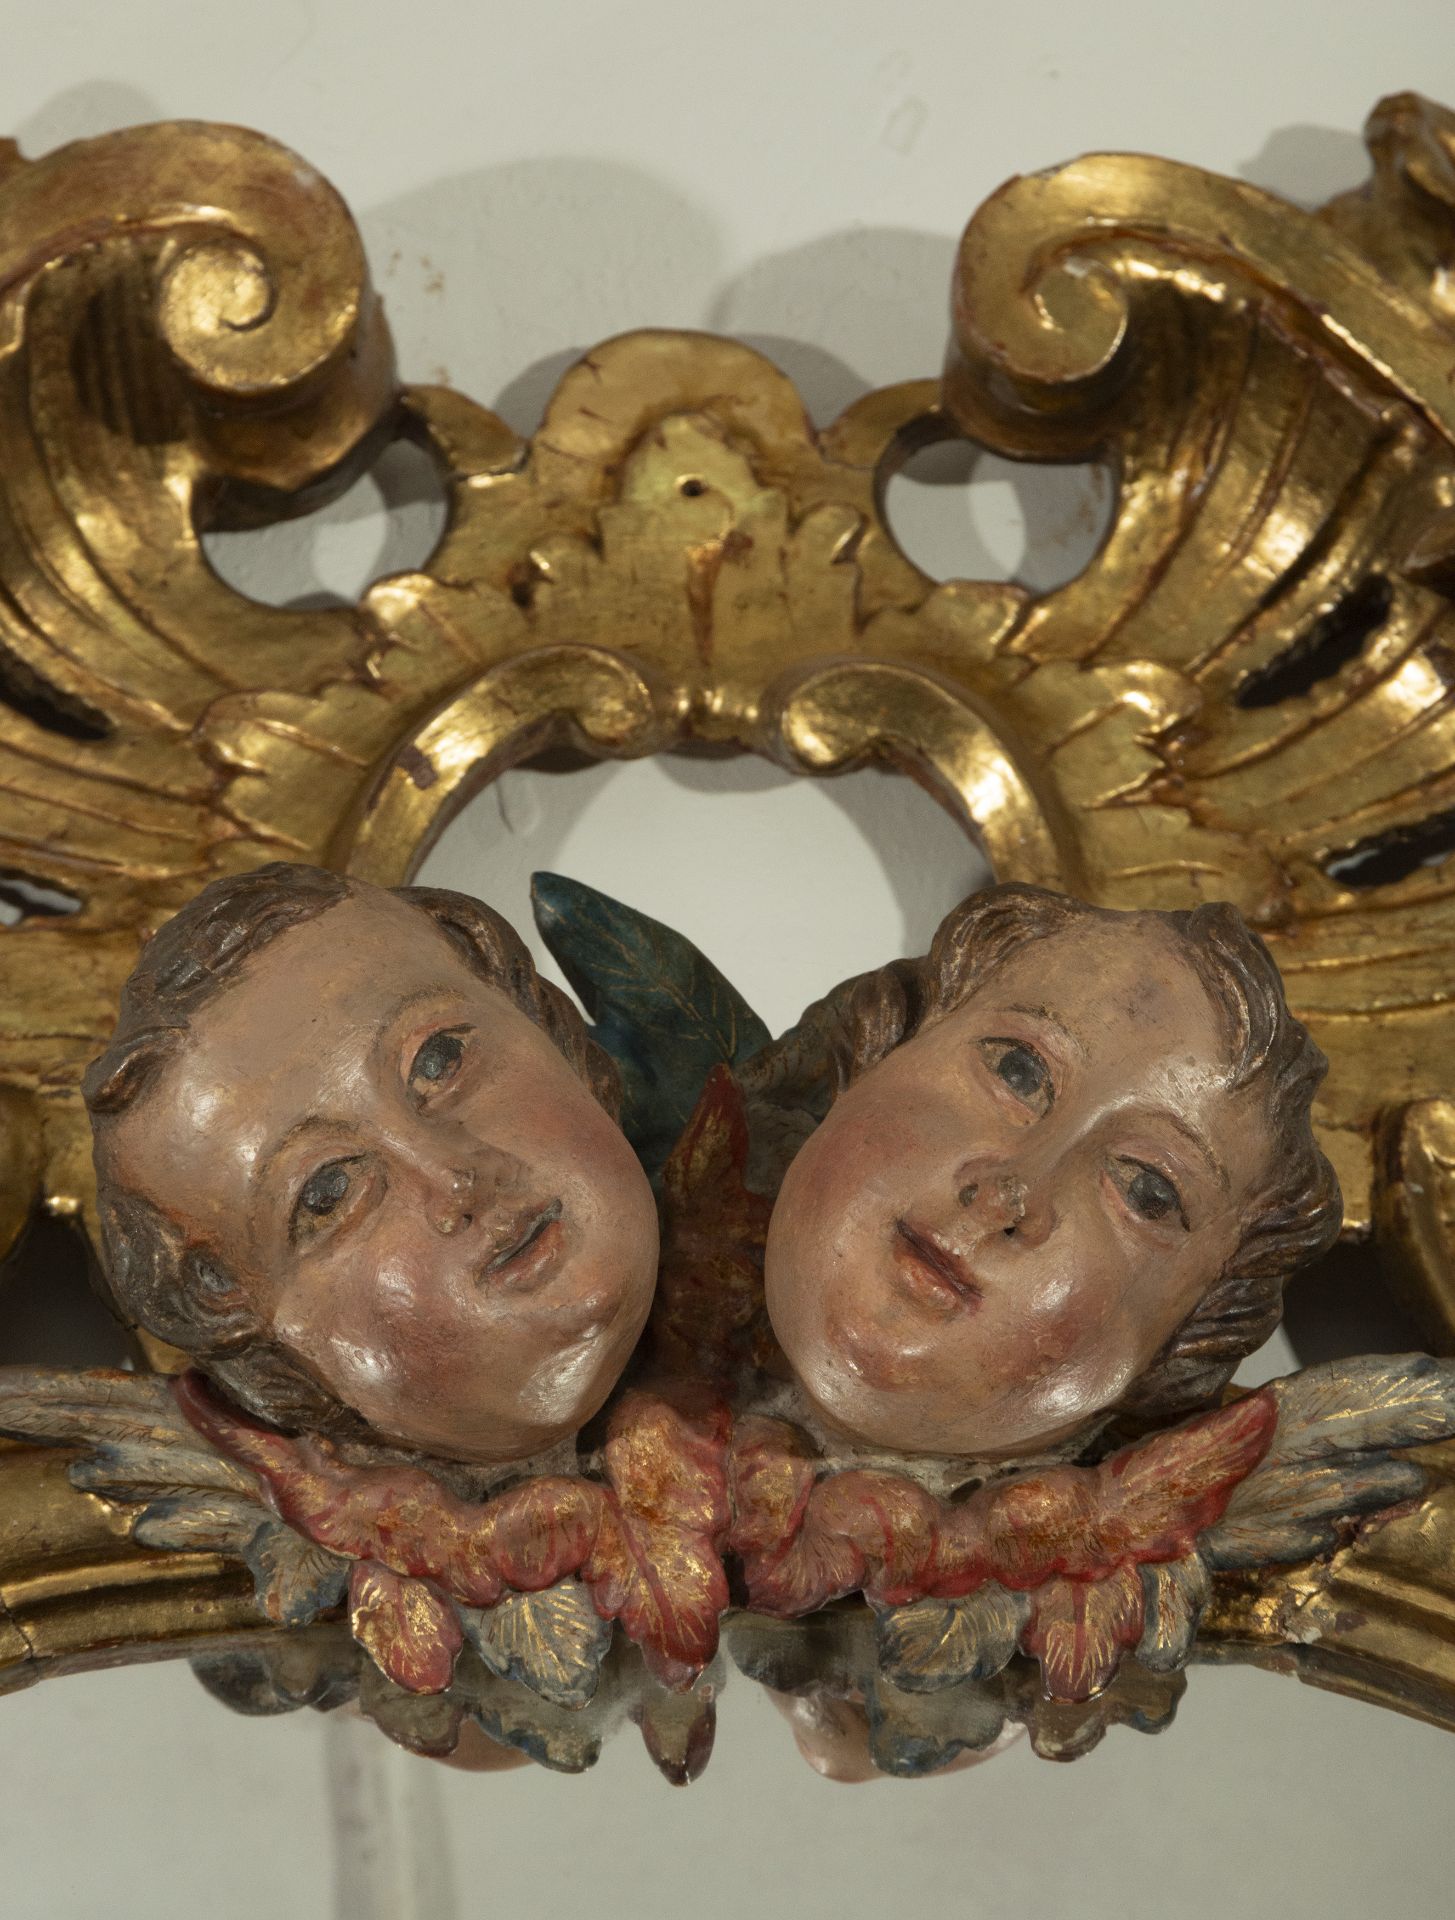 Antique Spanish frame from the 17th century transformed into a carved wood mirror - Image 5 of 6